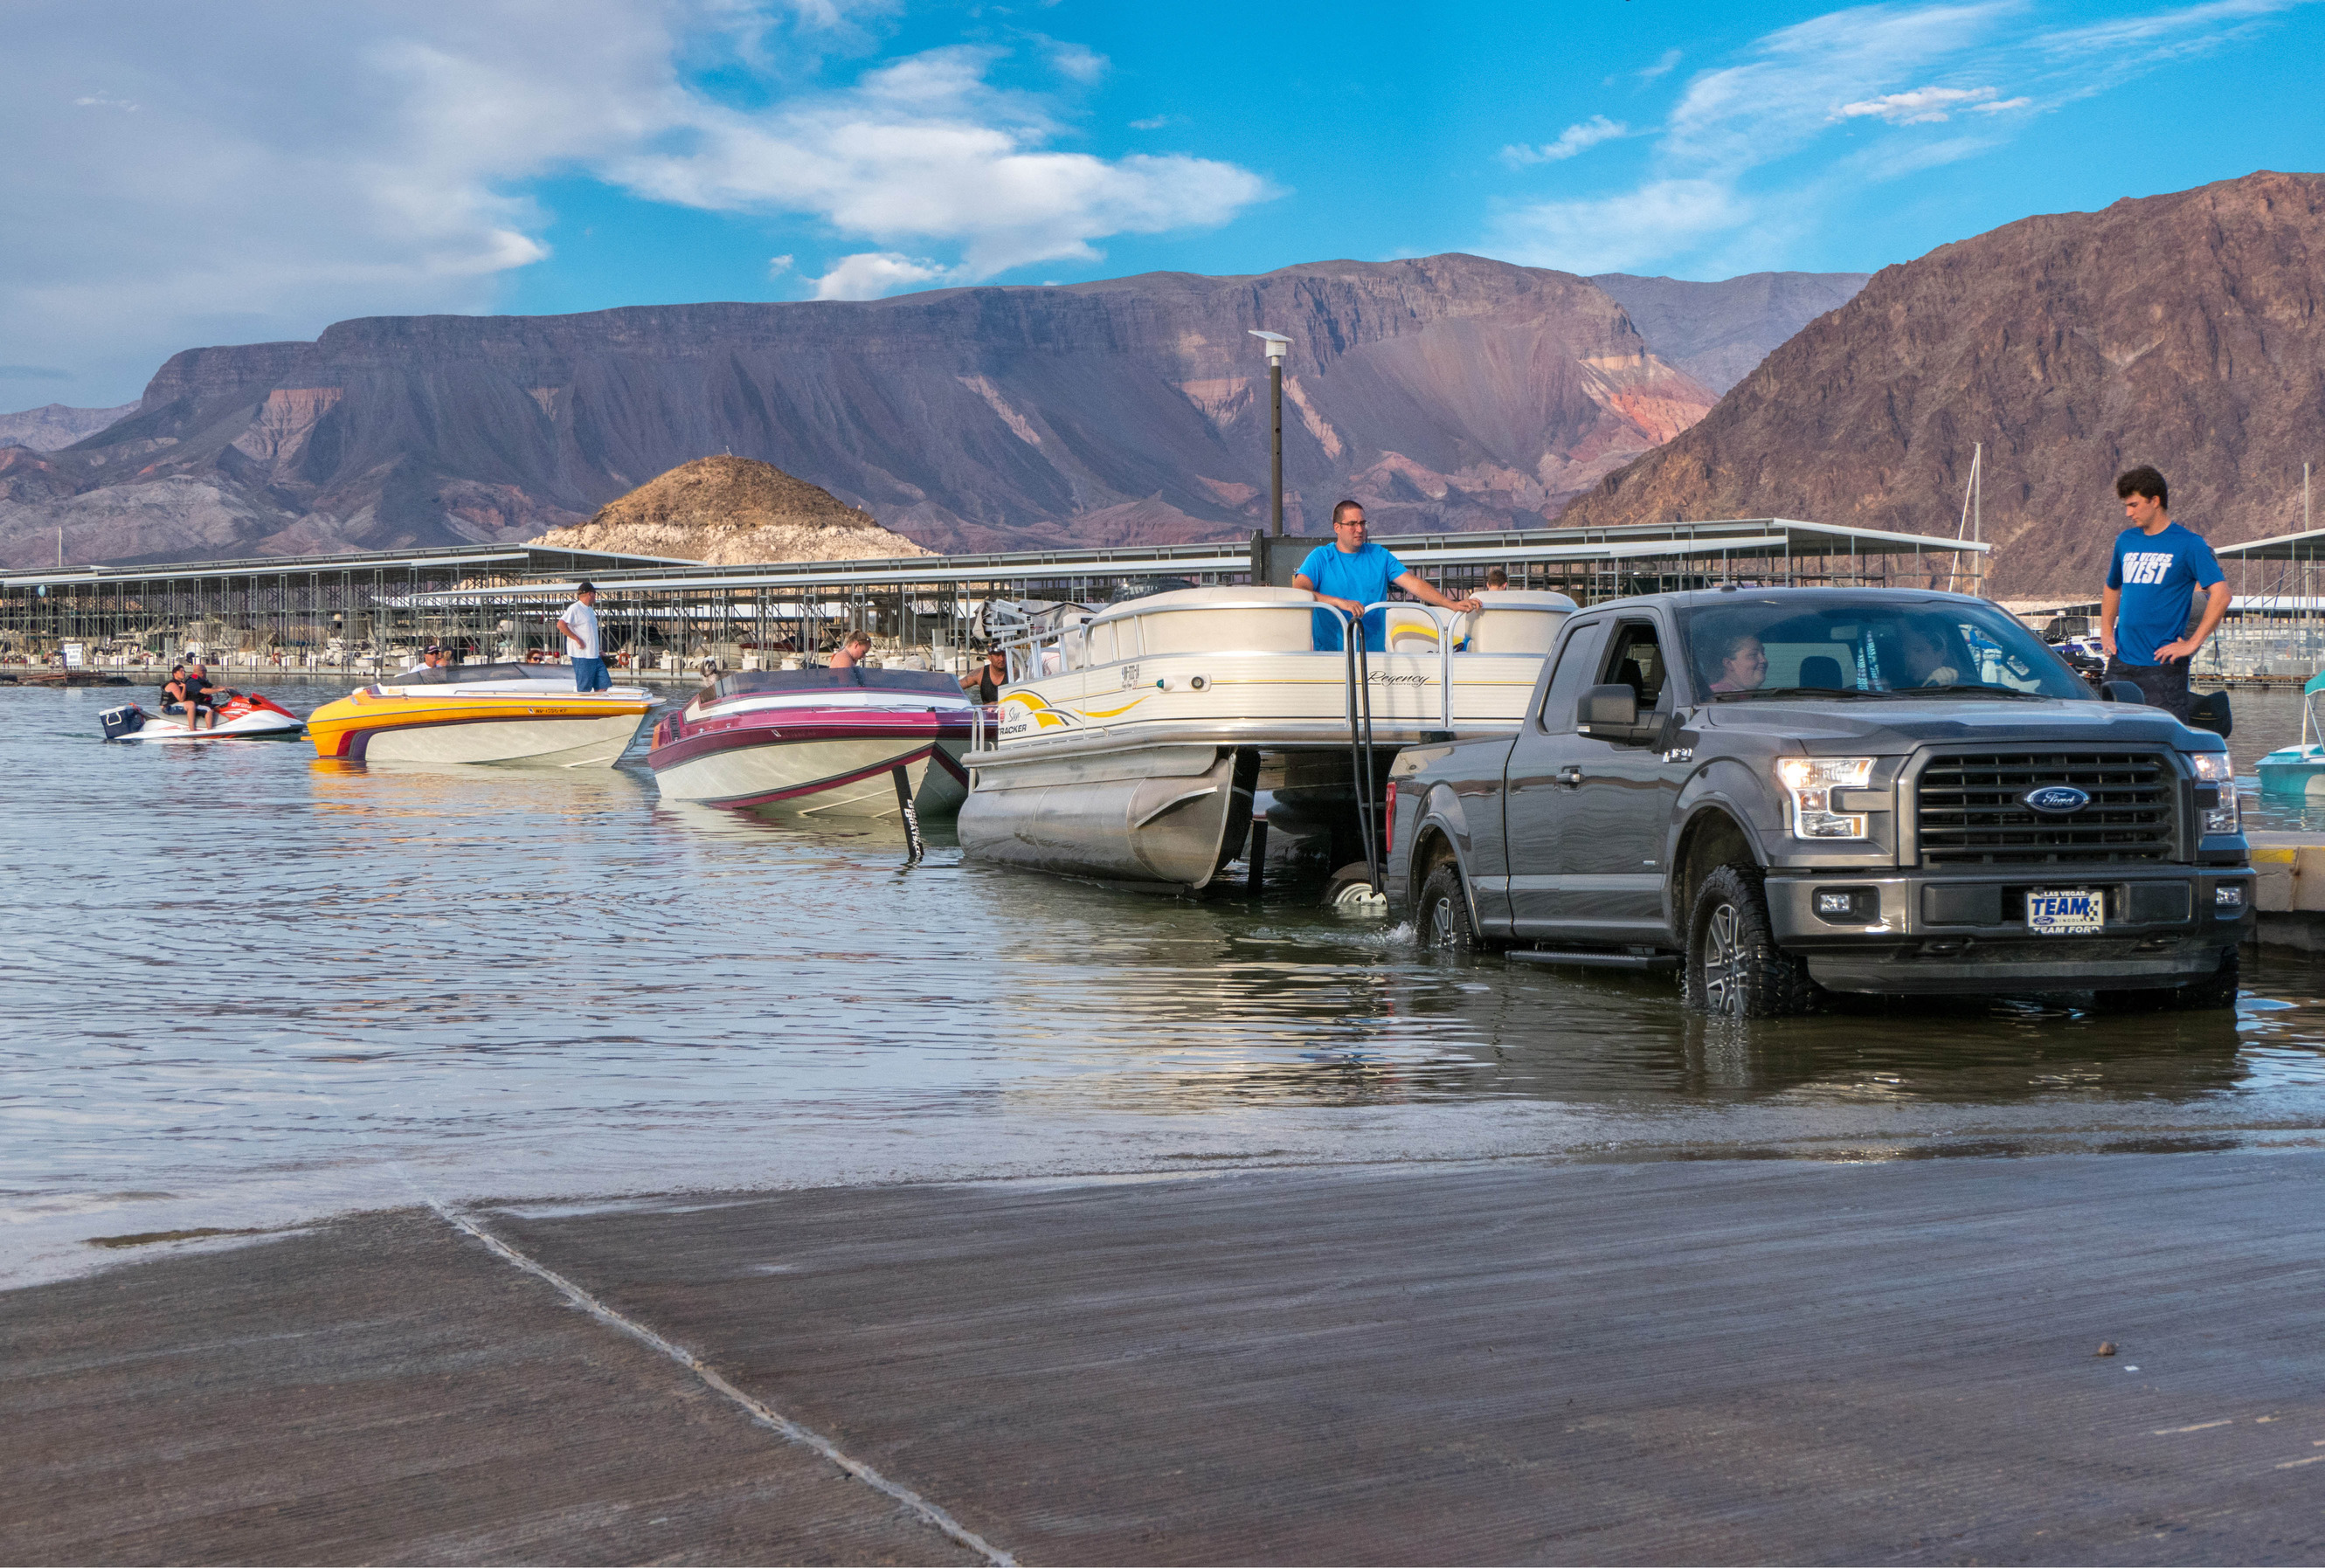 Truck and three boats in water, mountains in background